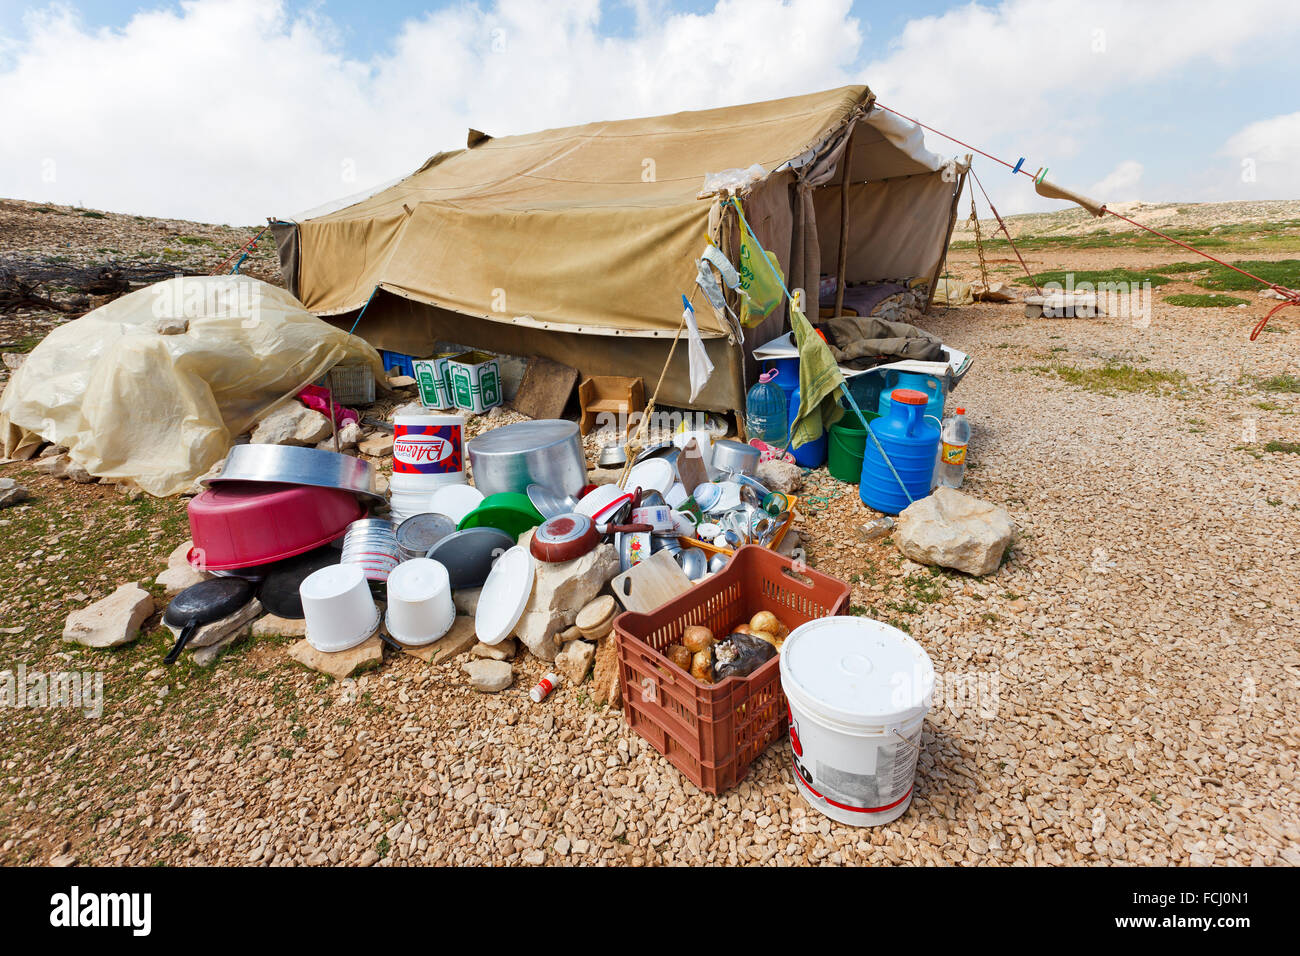 Tent and kitchenware belonging to goat shepherds in the mountains, Lebanon Stock Photo